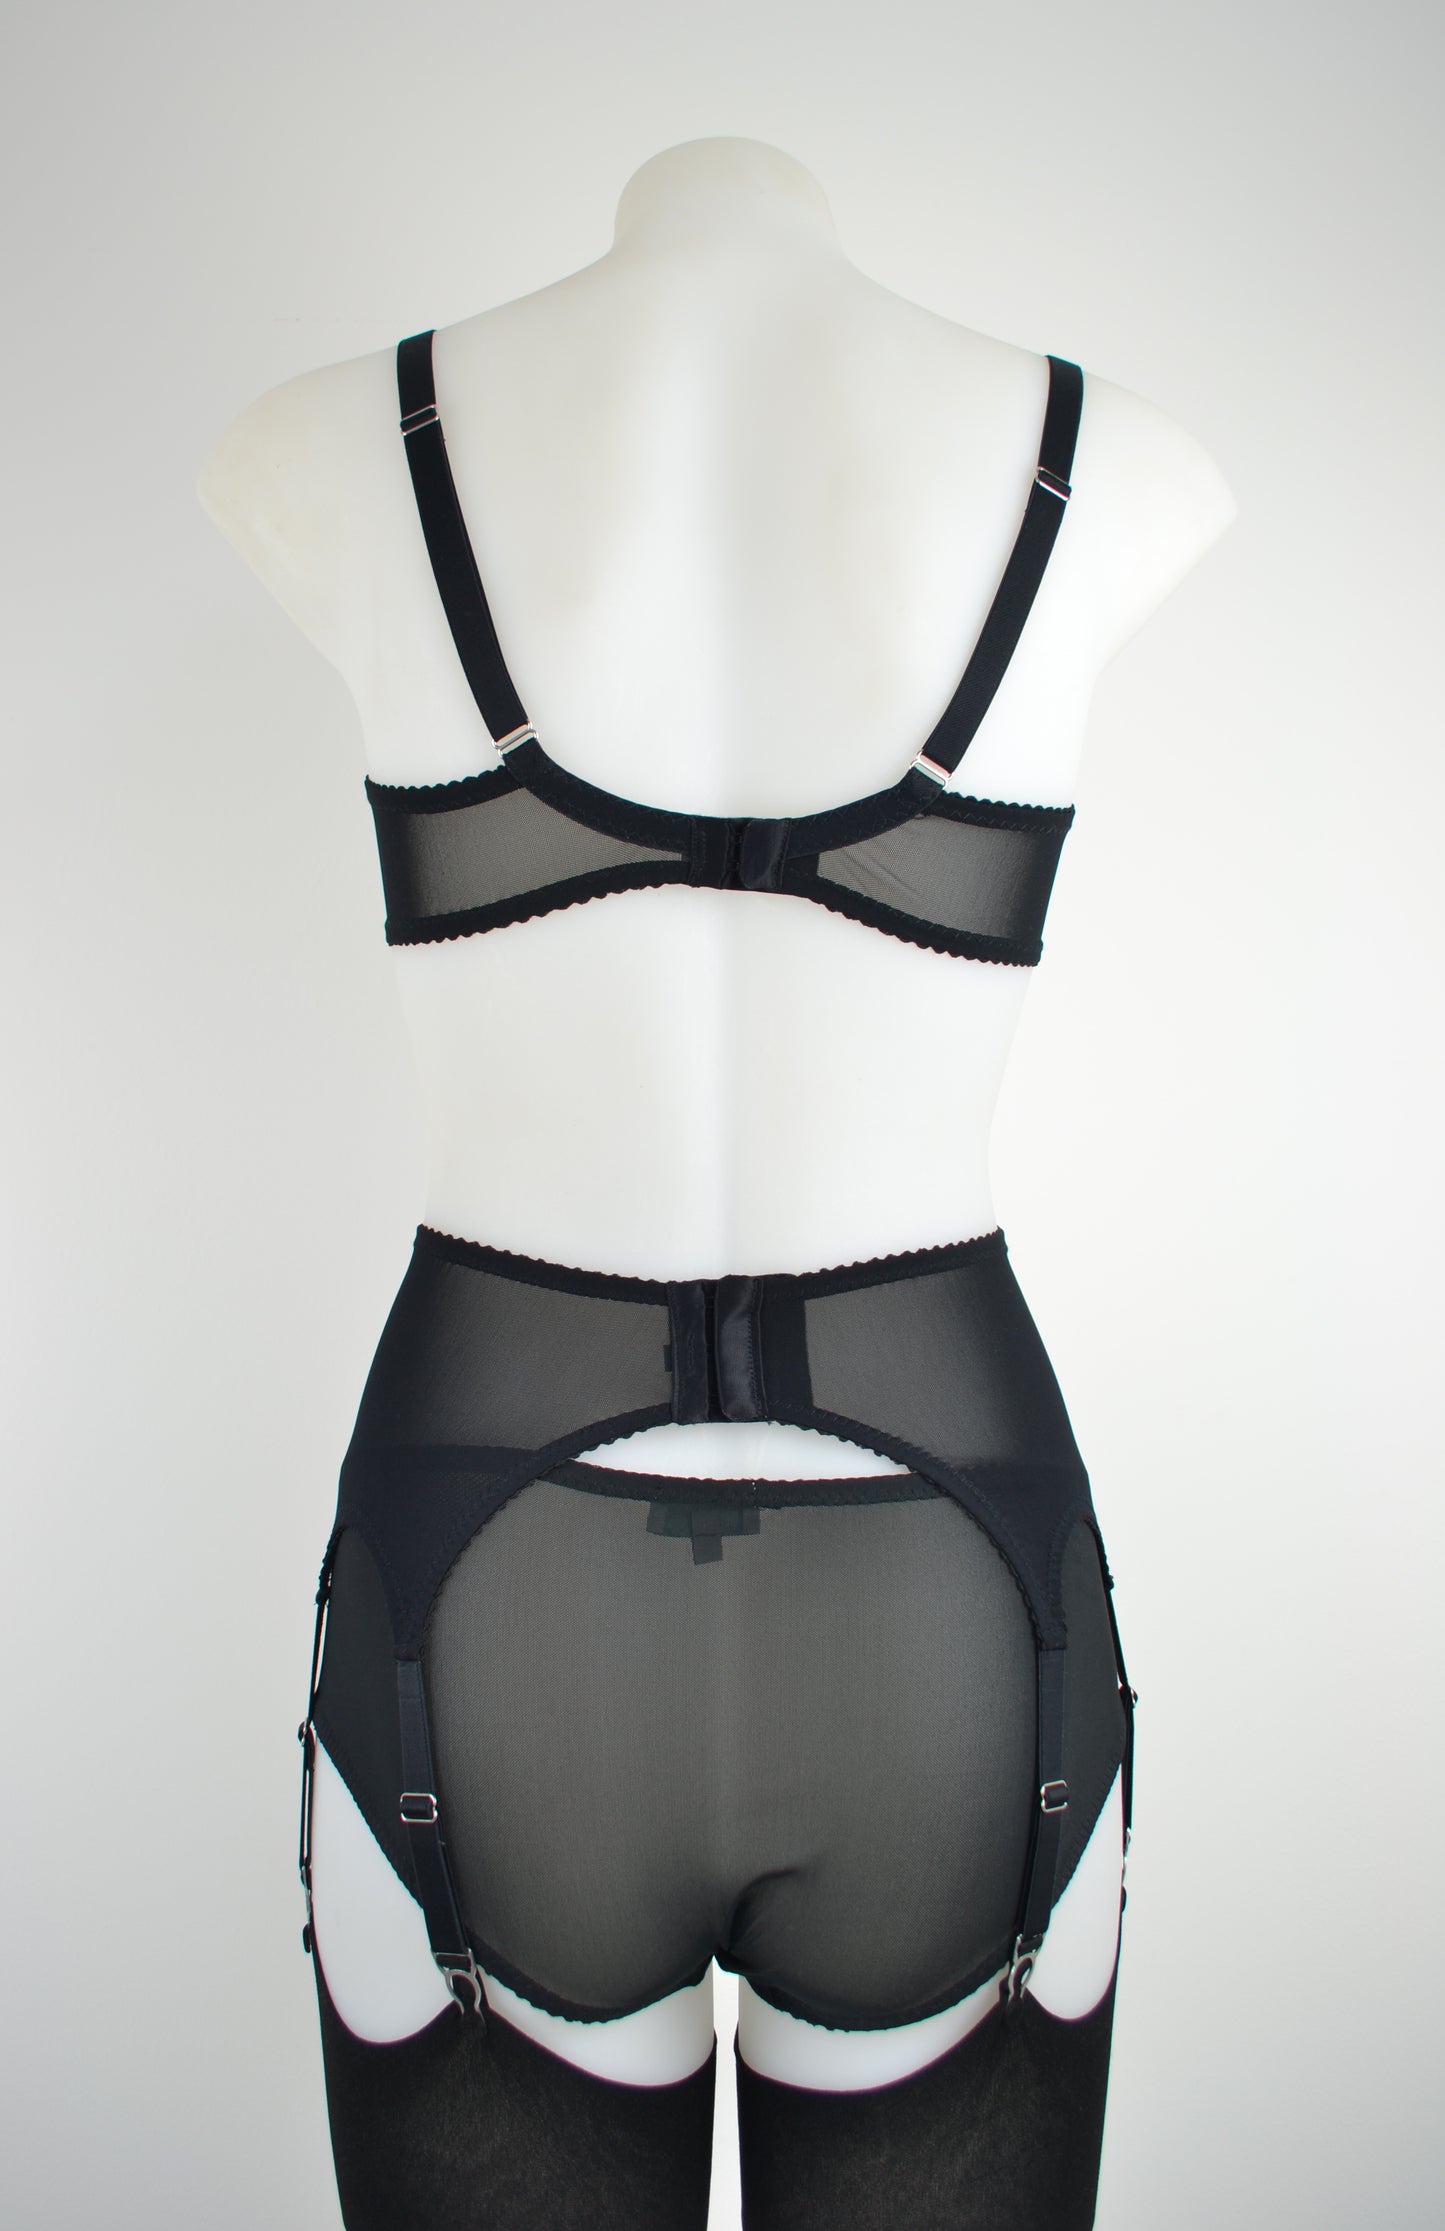 SHEER BLACK classic 6 strap metal clip suspender garter belt made in the uk available in plus size by pip and pantalaimon